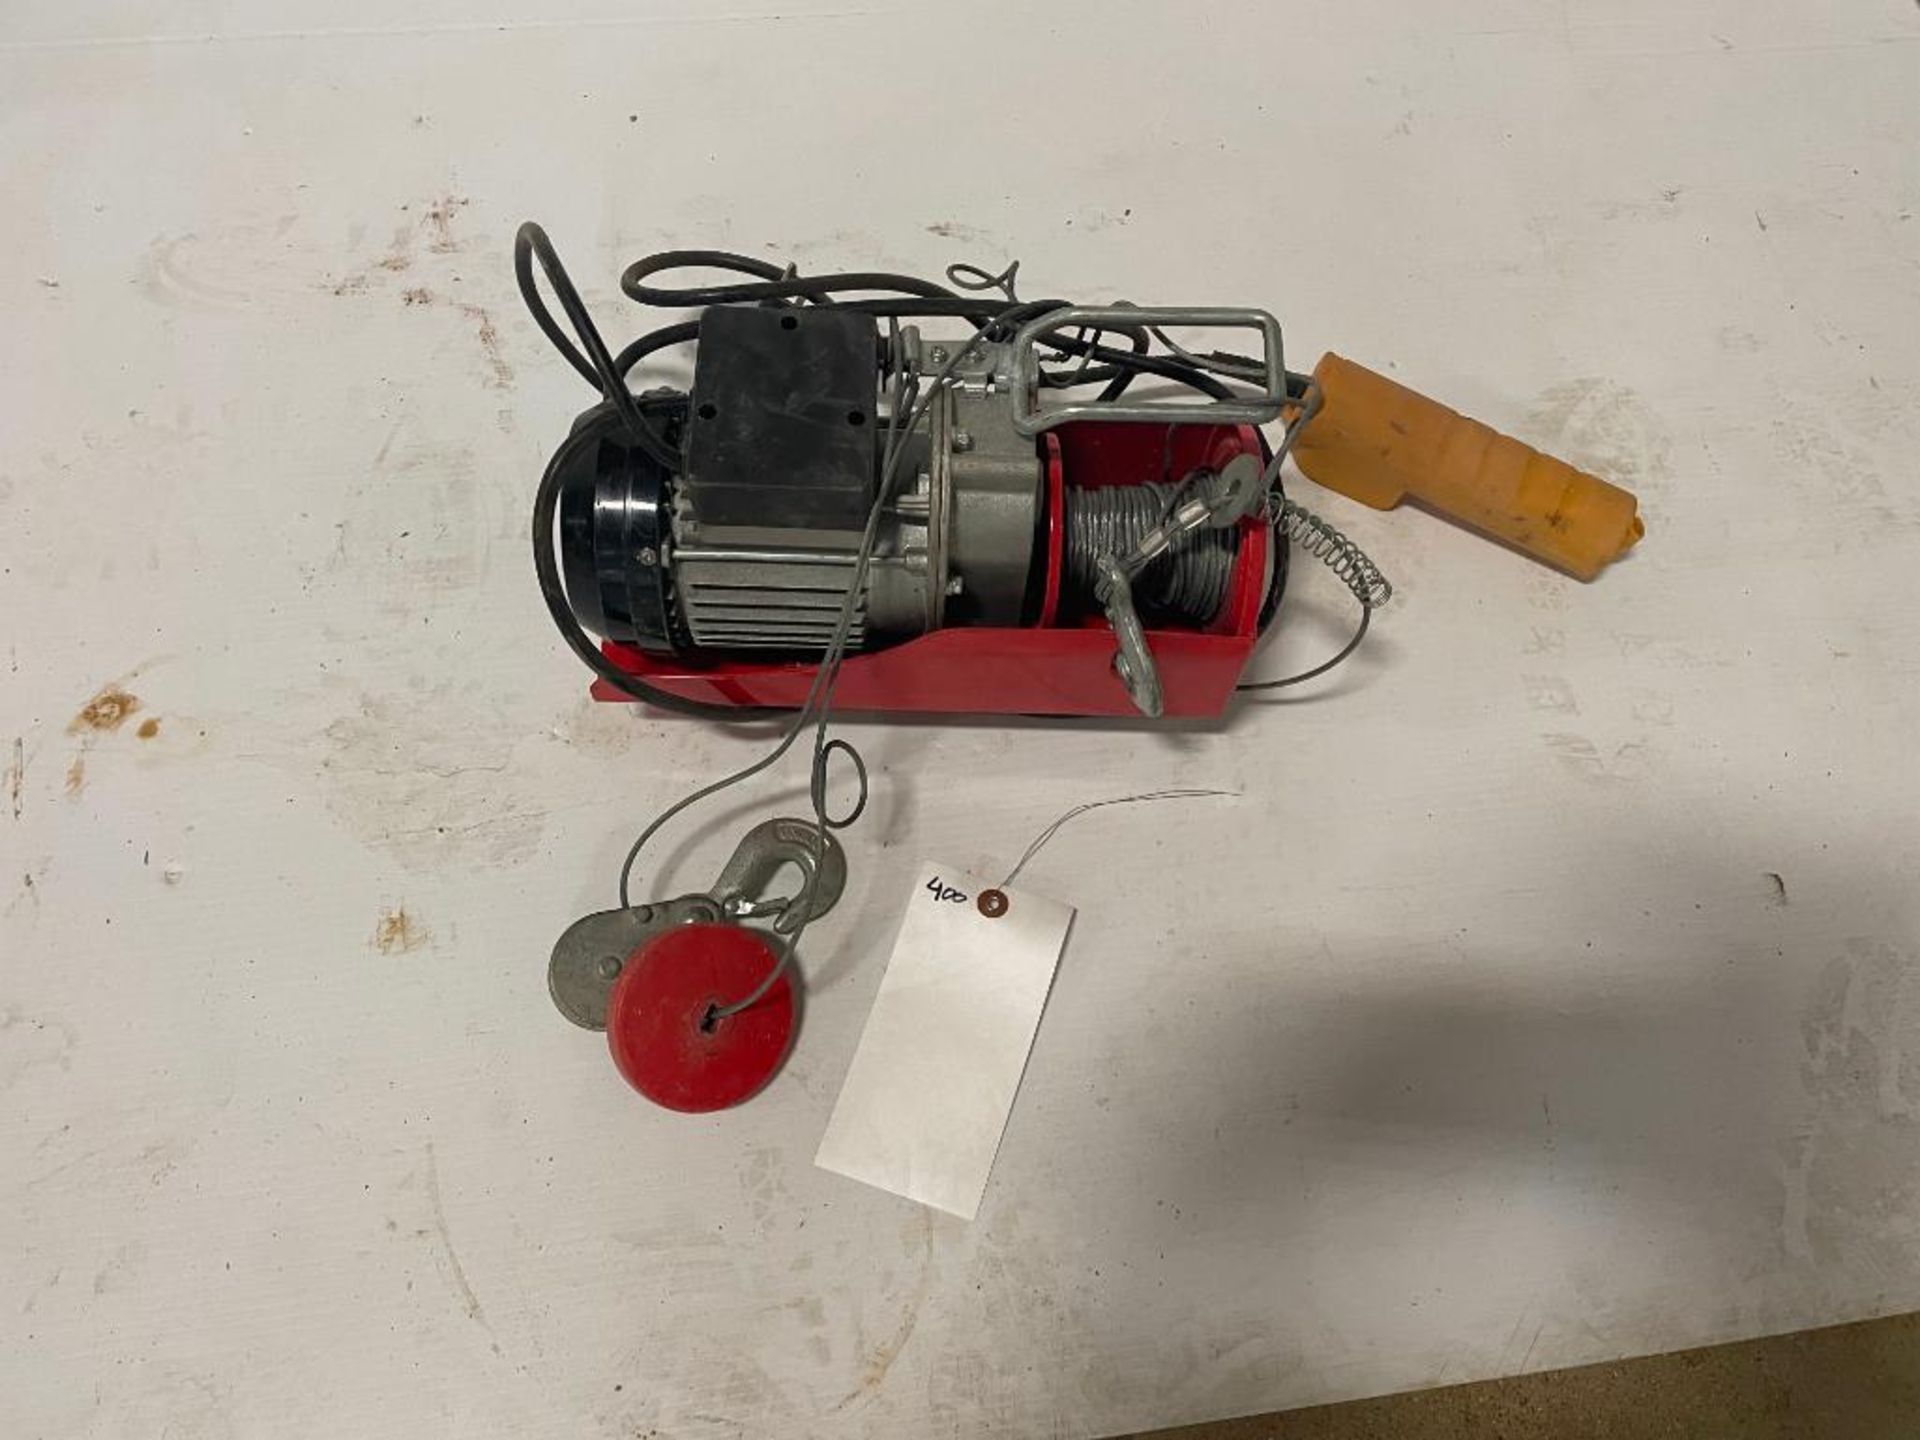 Pittsburgh 440 # Remote Controlled Electric Hoist, Serial #391737247, 220# Single Line & 440# Double